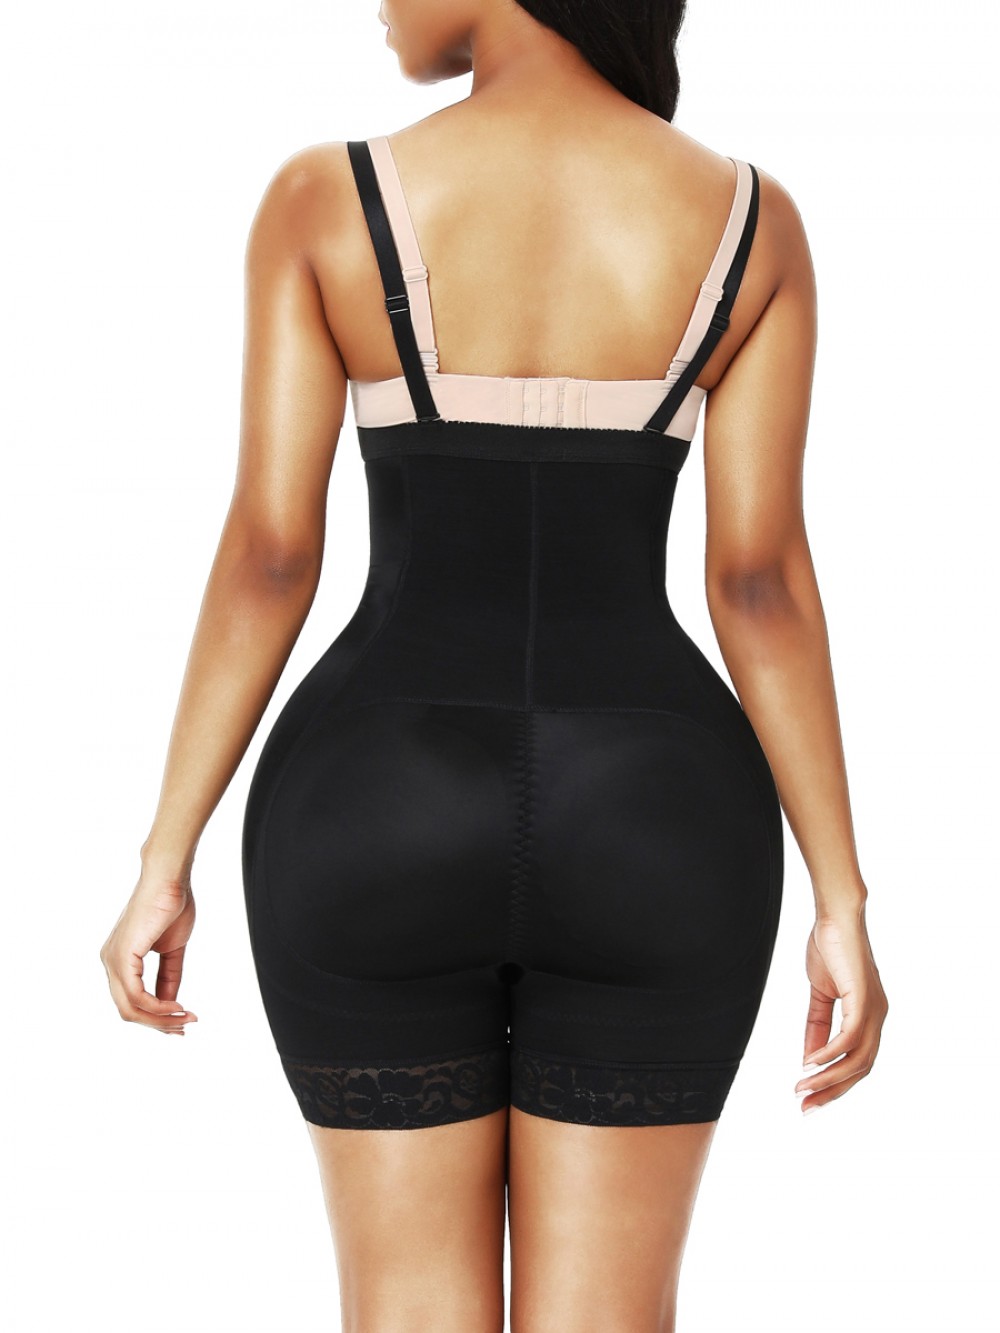 High Waist Butt Lifter Black Lace Removable Pads Slimming Tummy